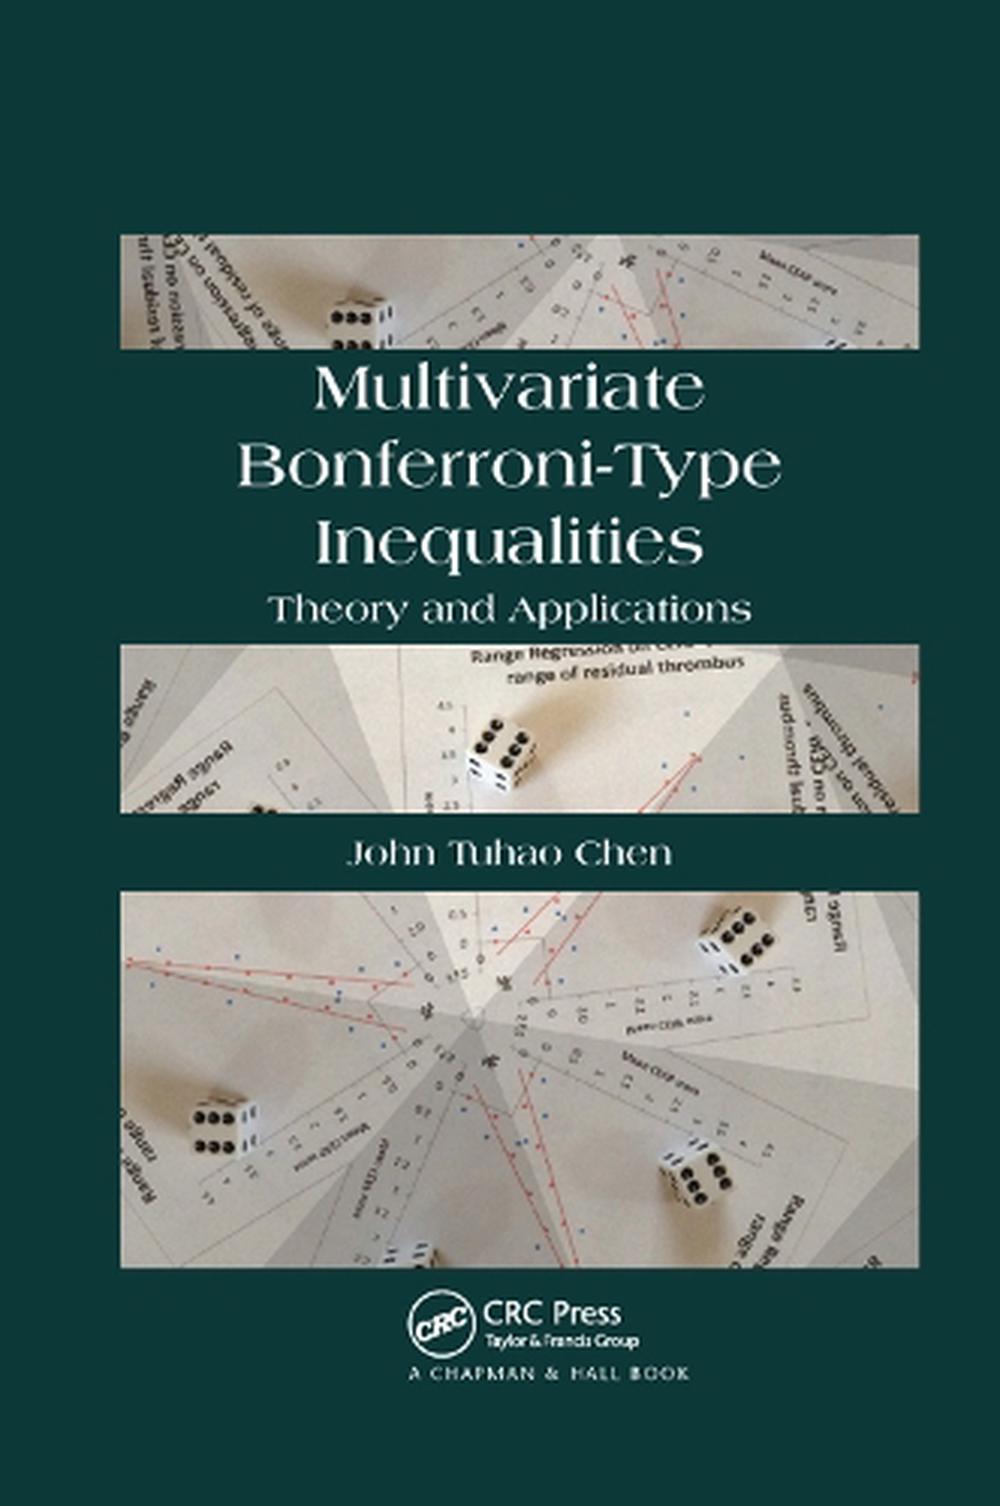 Multivariate BonferroniType Inequalities Theory and Applications by John Chen 9780367378523 eBay